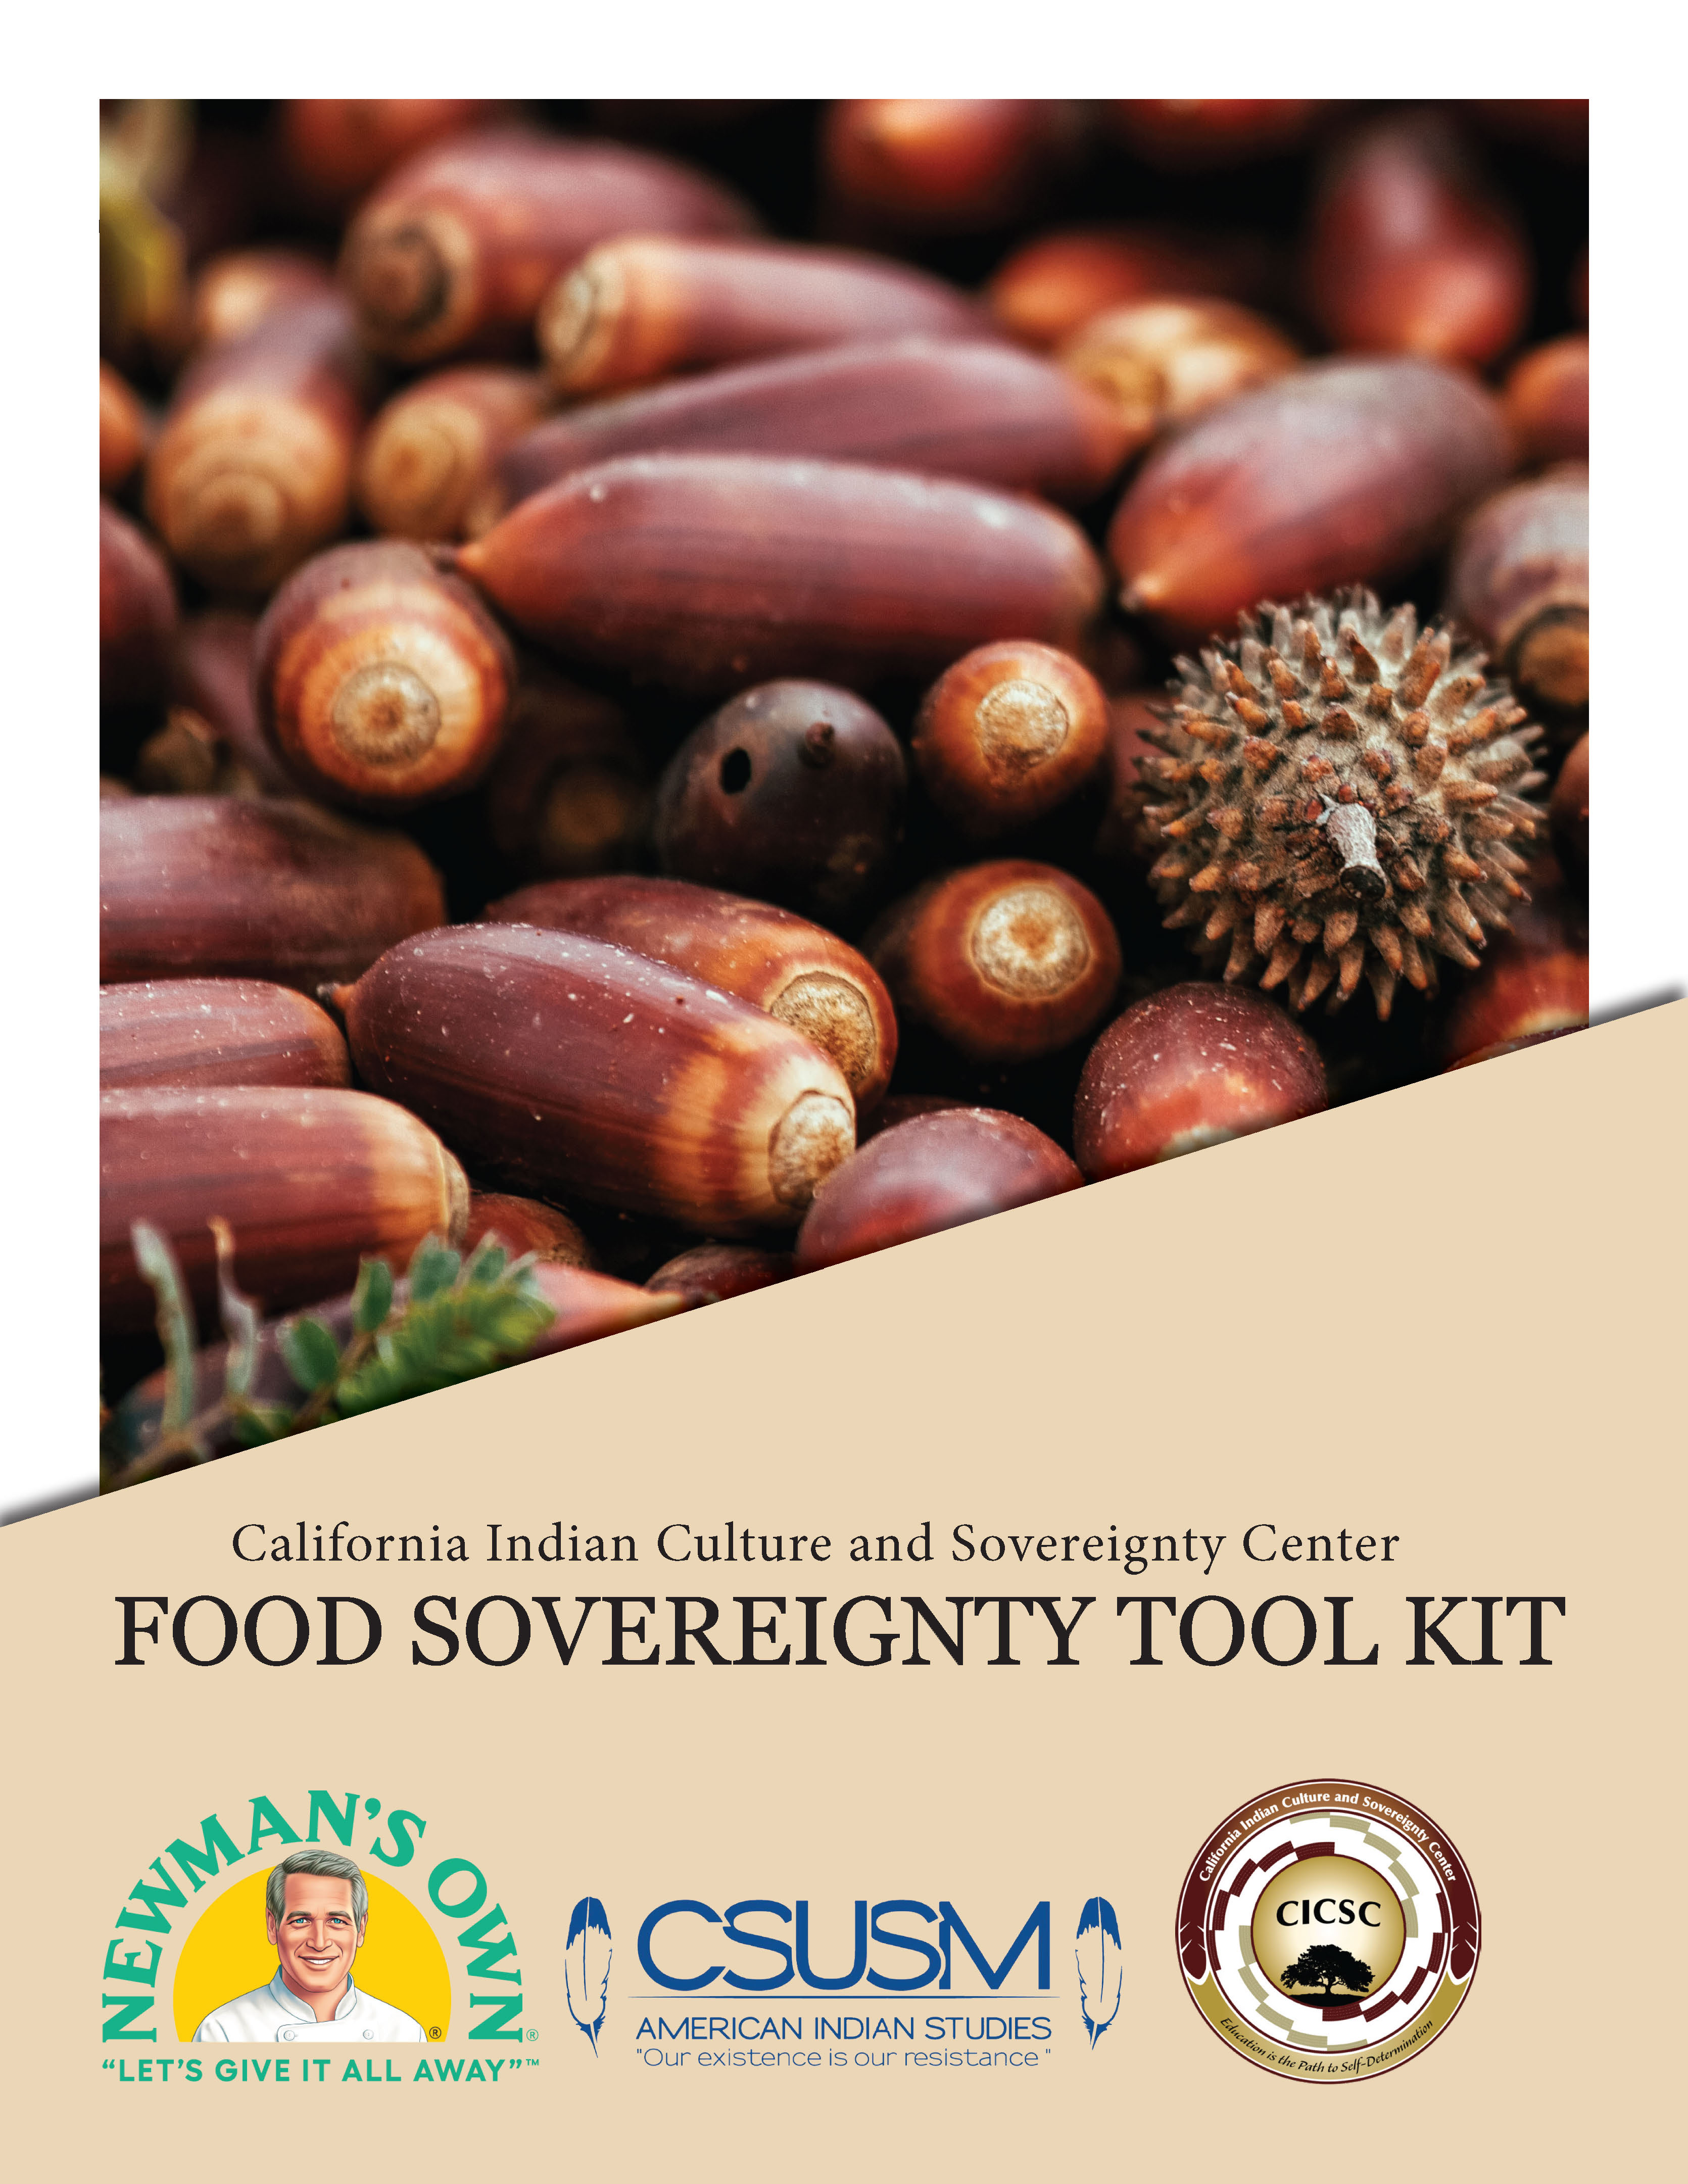 CICSC Food Sovereignty Toolkit Cover